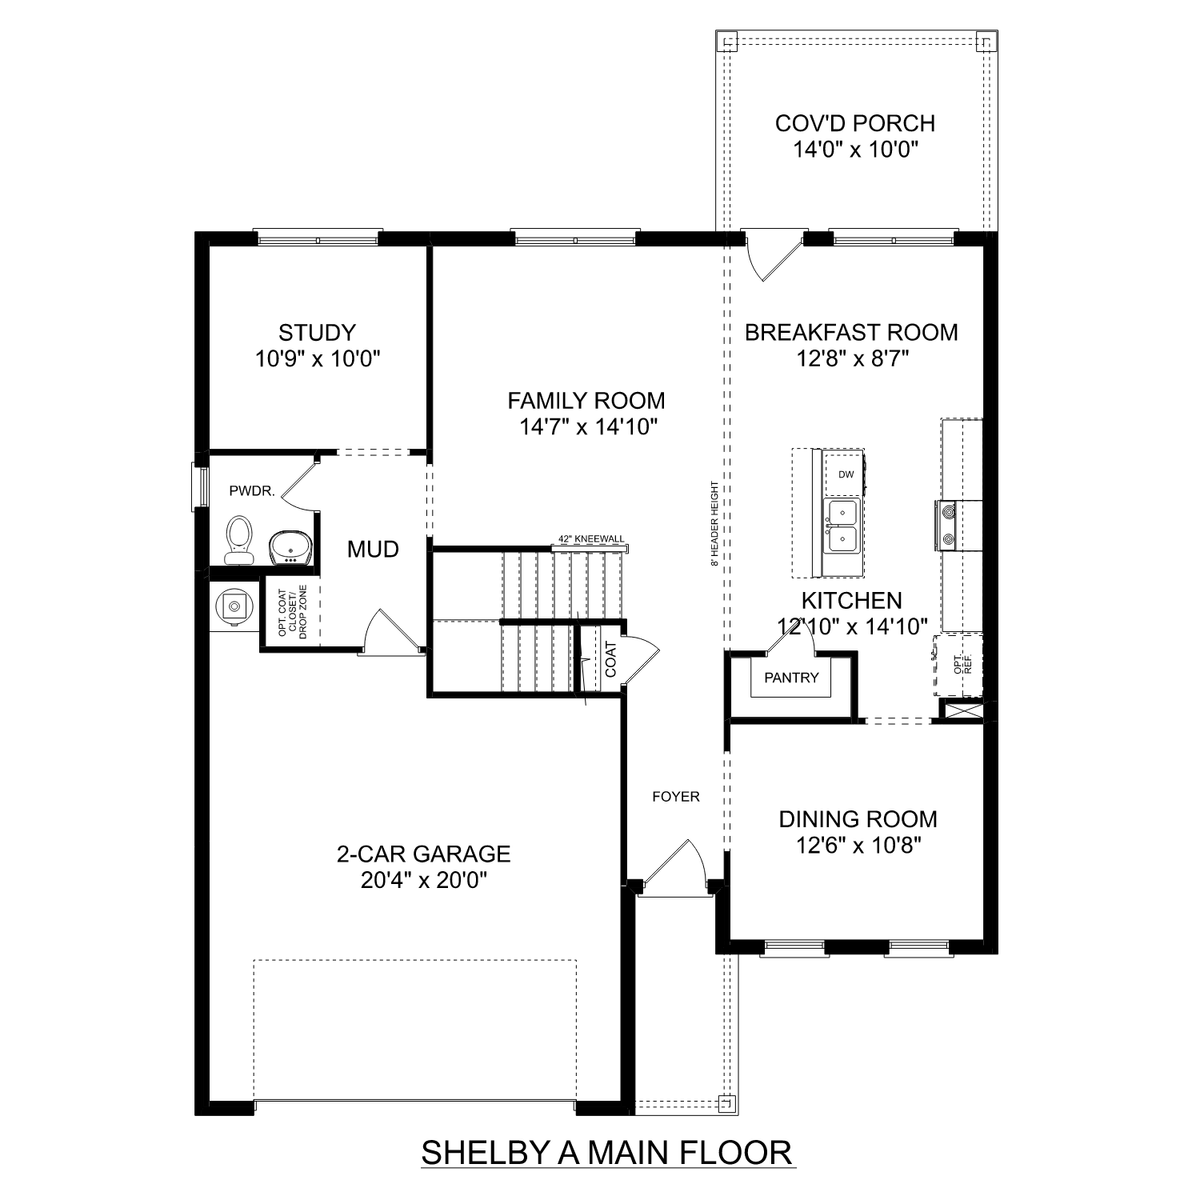 1 - The Shelby A buildable floor plan layout in Davidson Homes' Hollon Meadow community.